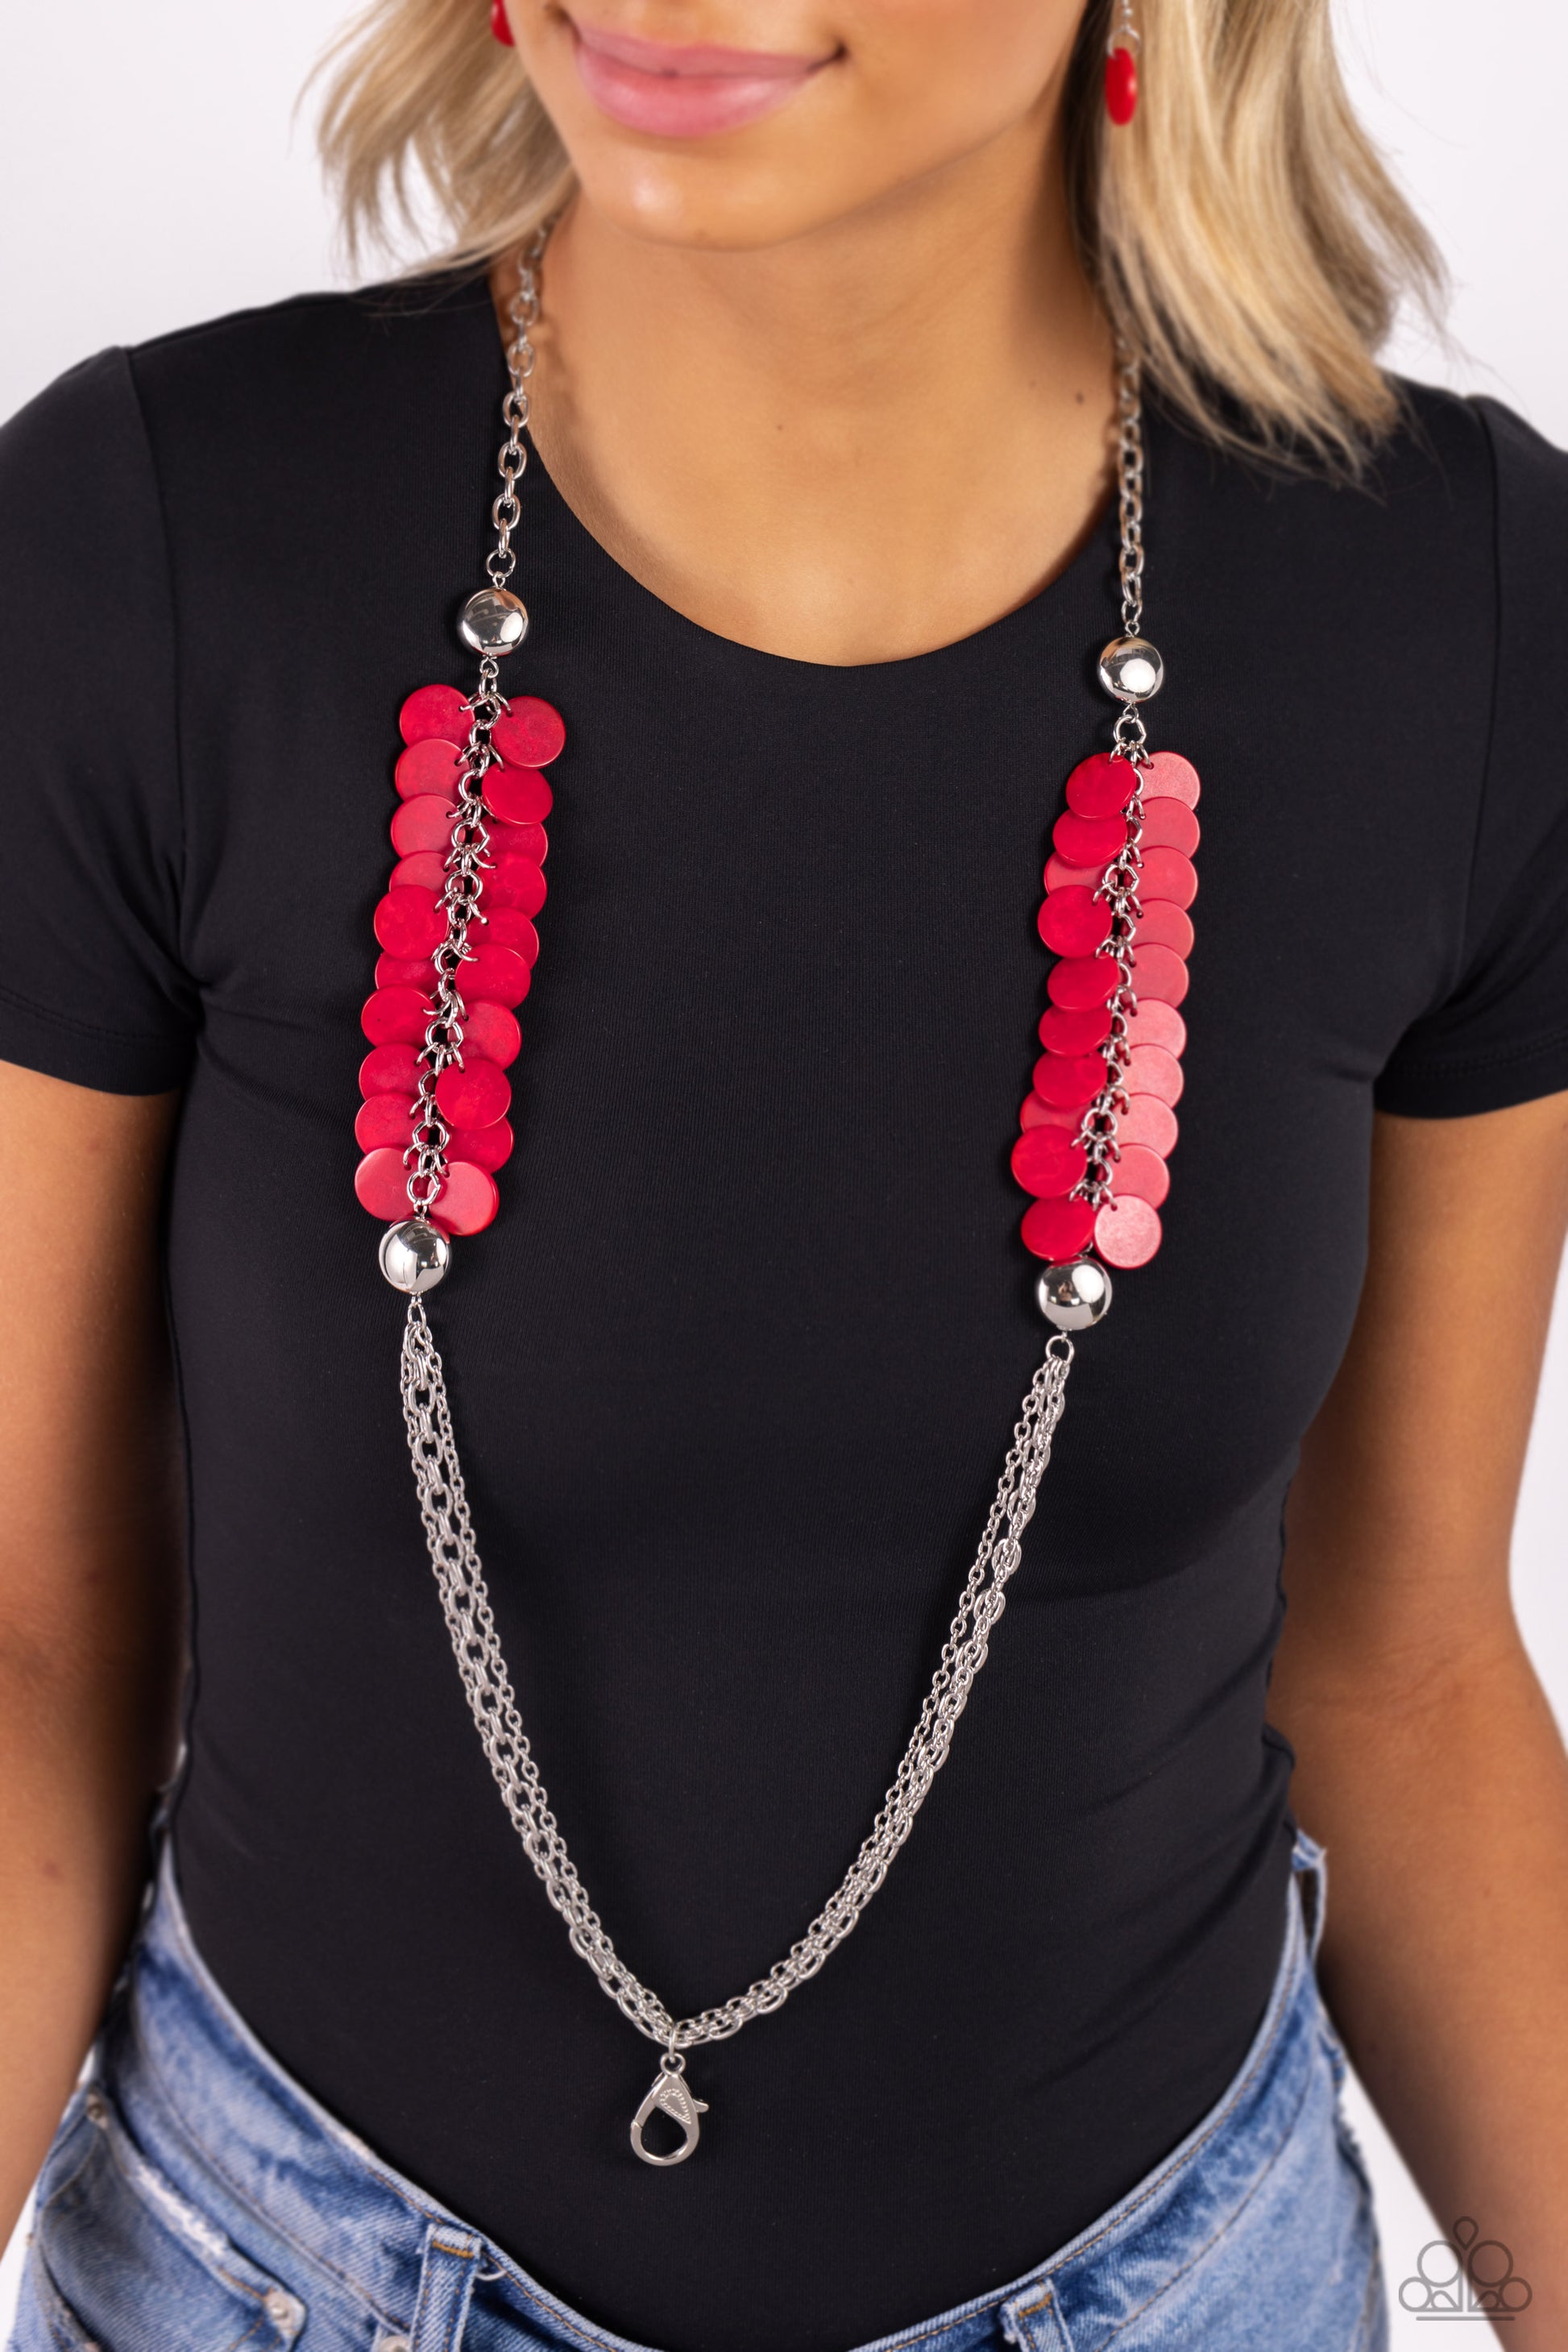 Paparazzi Accessories Shell Sensation - Red Flared between two oversized silver beads, a collection of red shell-like beads give way to sections of silver chains that connect across the chest for a colorful summery look. A lobster clasp hangs from the bot